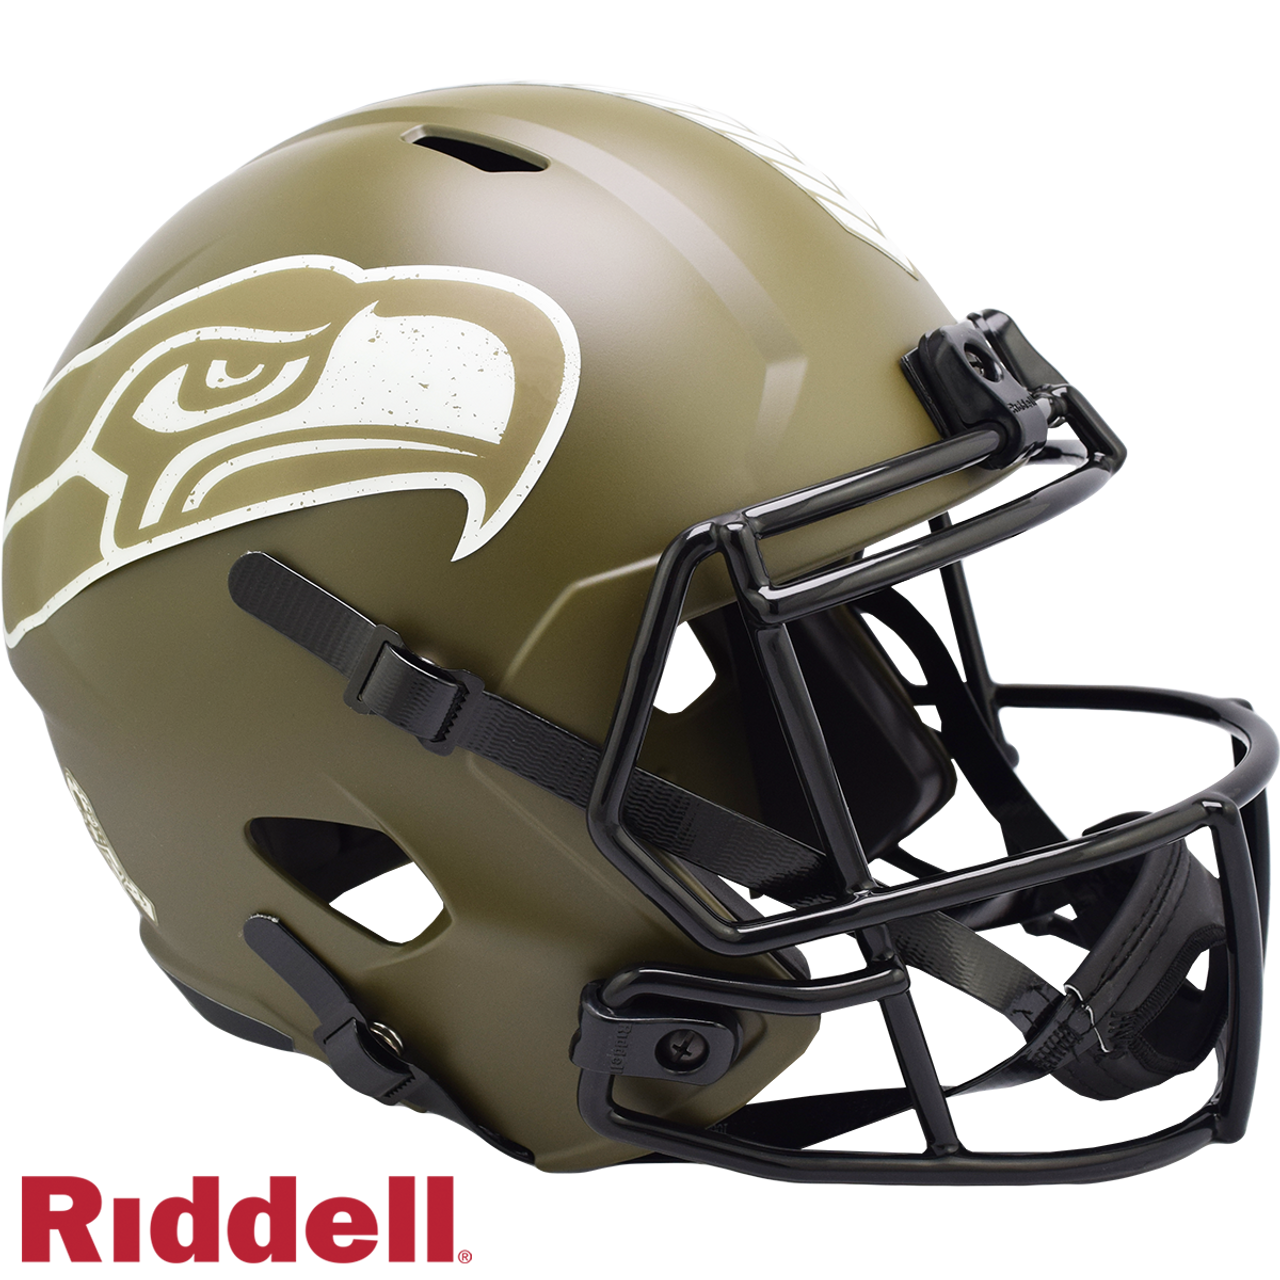 Seattle Seahawks Helmet Riddell Replica Full Size Speed Style Salute To Service